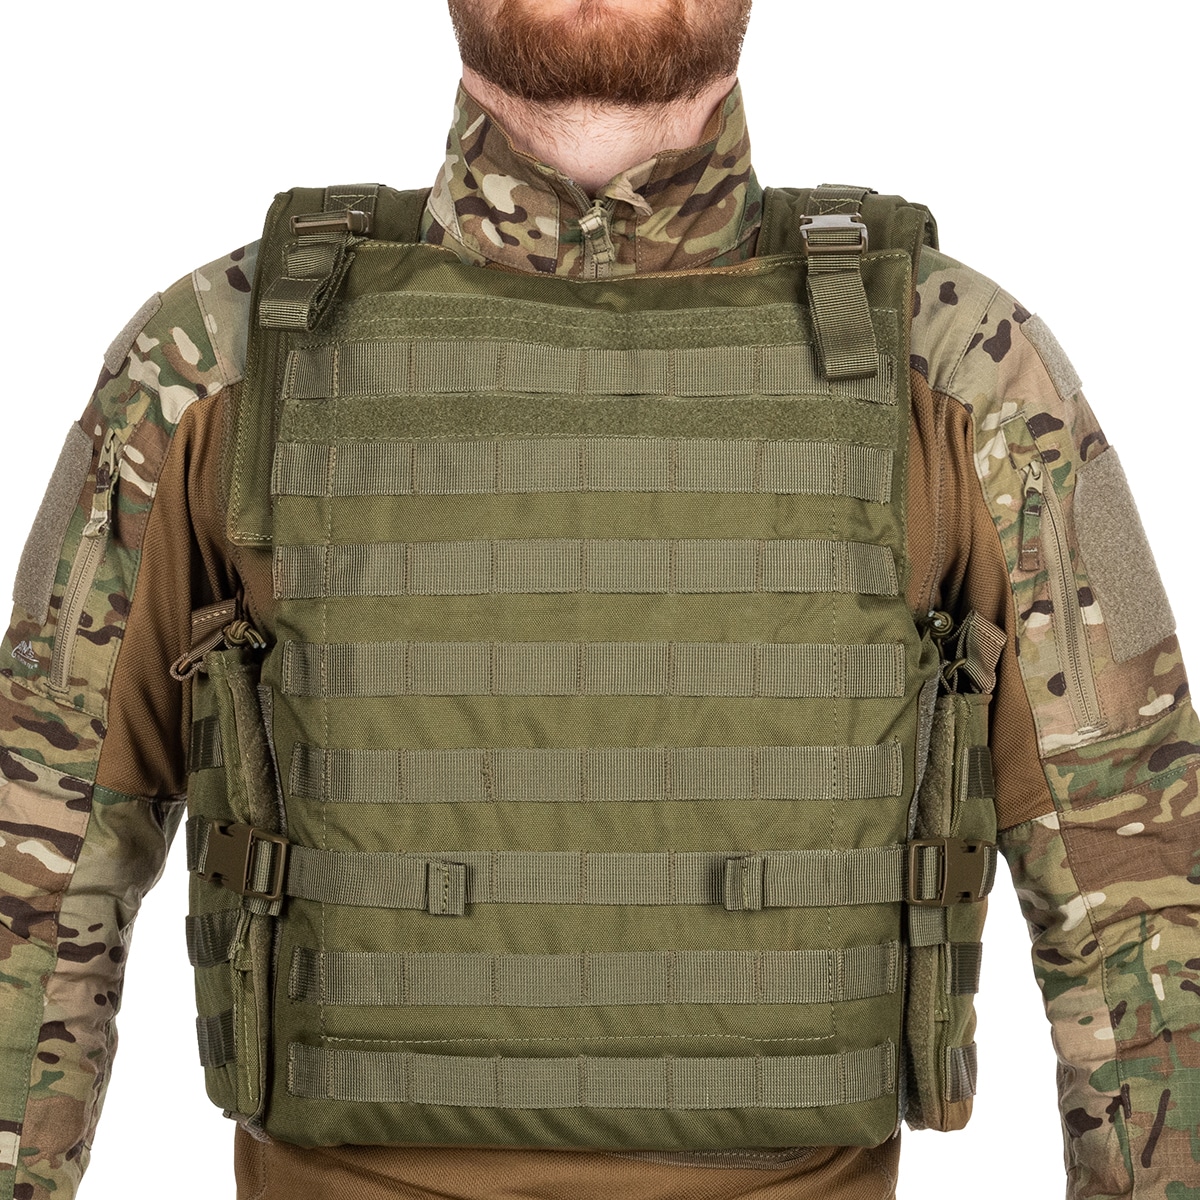 Плитоноска Voodoo Tactical  Armor Plate Carrier Maximum Protection - Olive